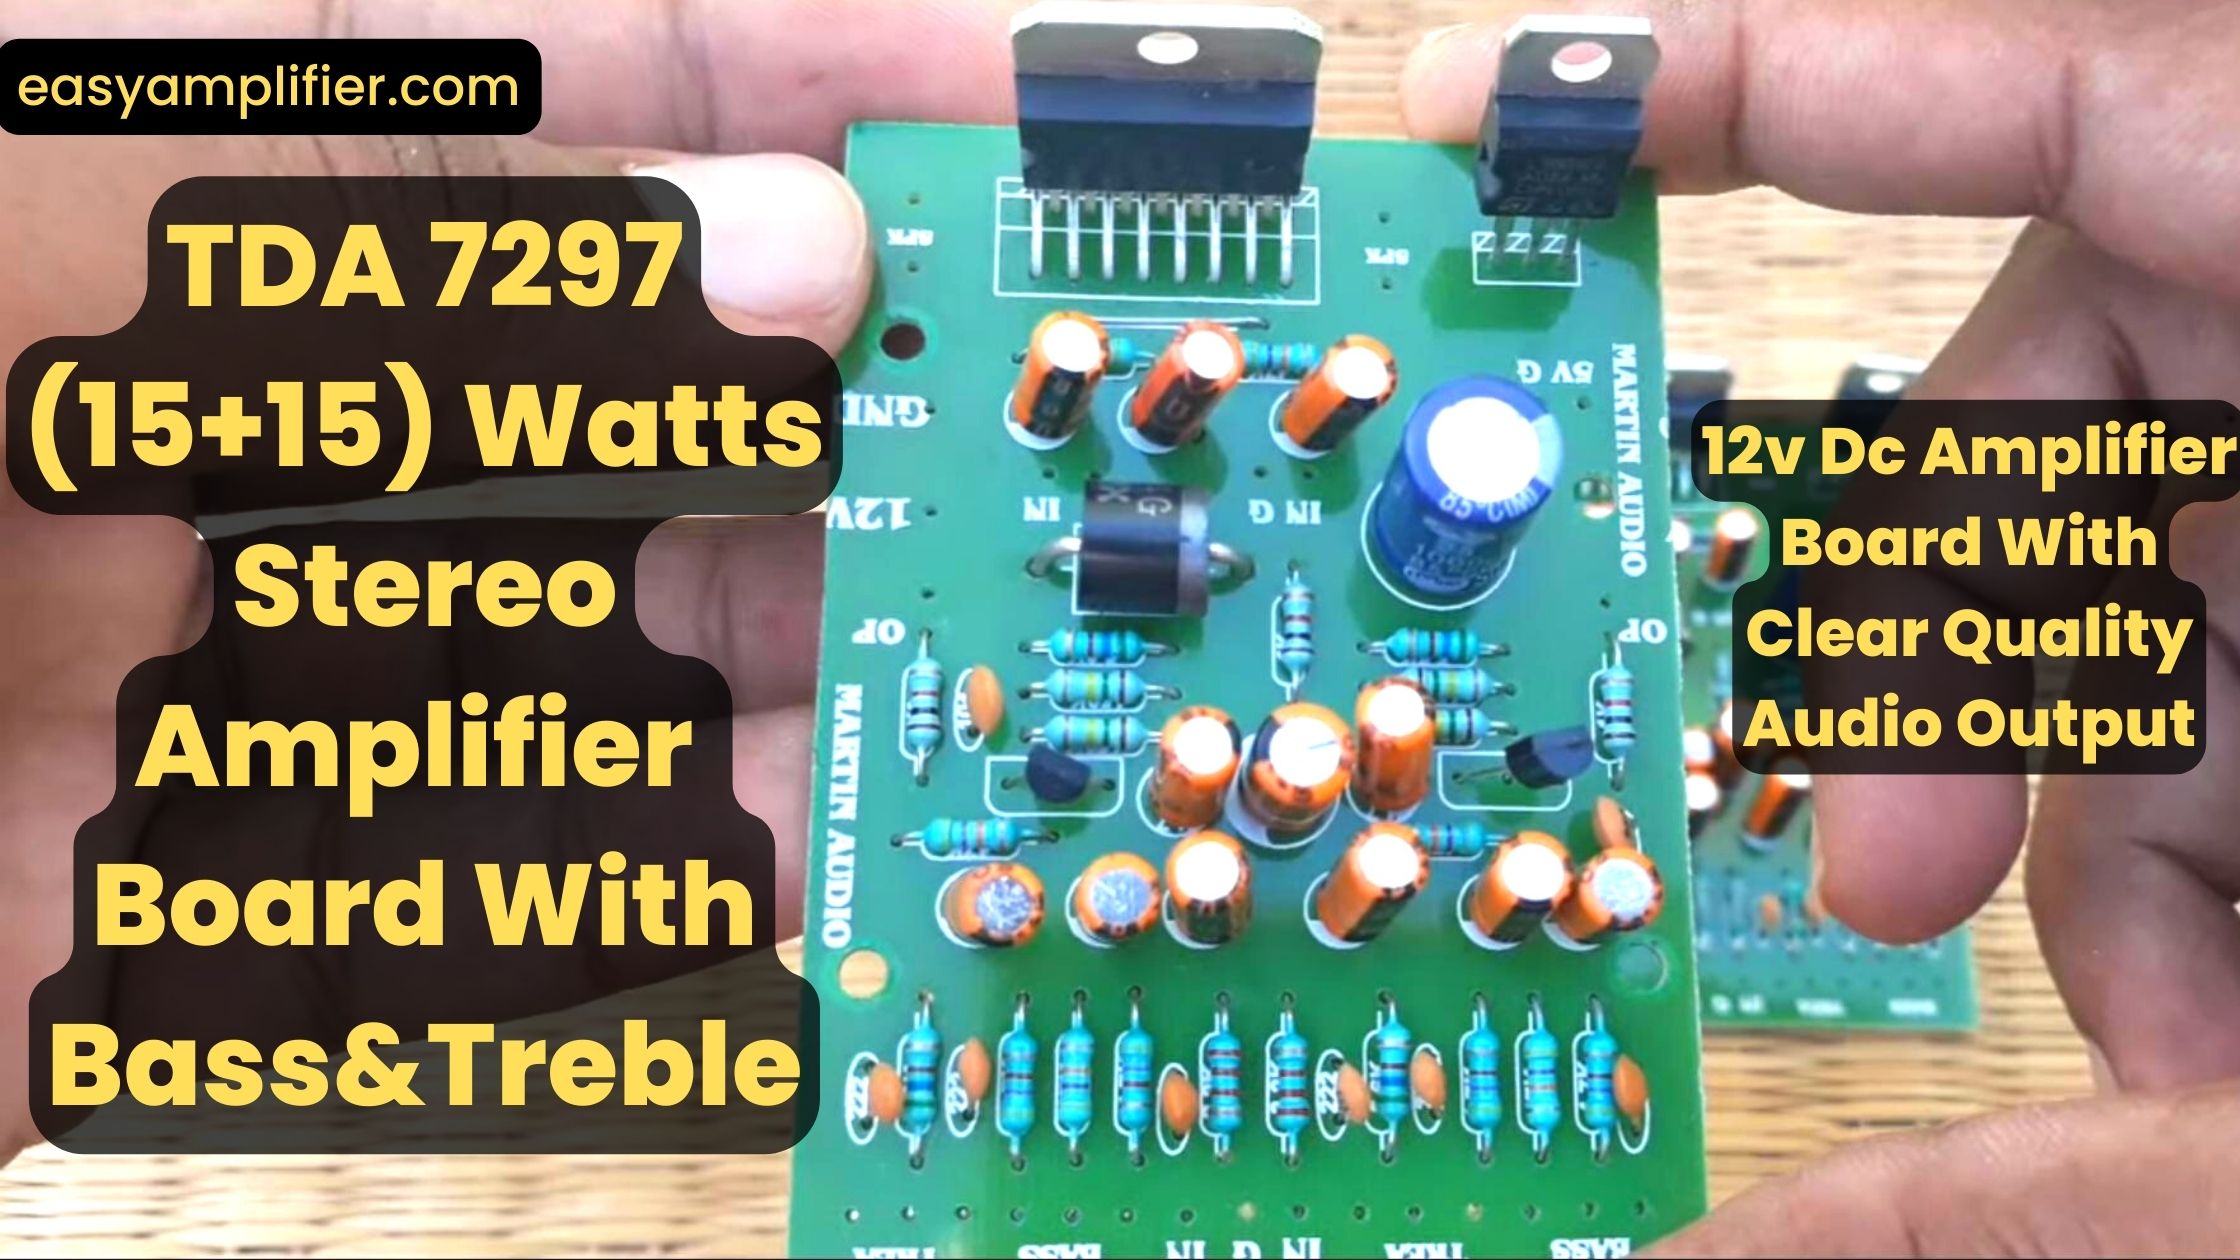 You are currently viewing Tda7297 (15+15) watts stereo amplifier board With Bass&Treble